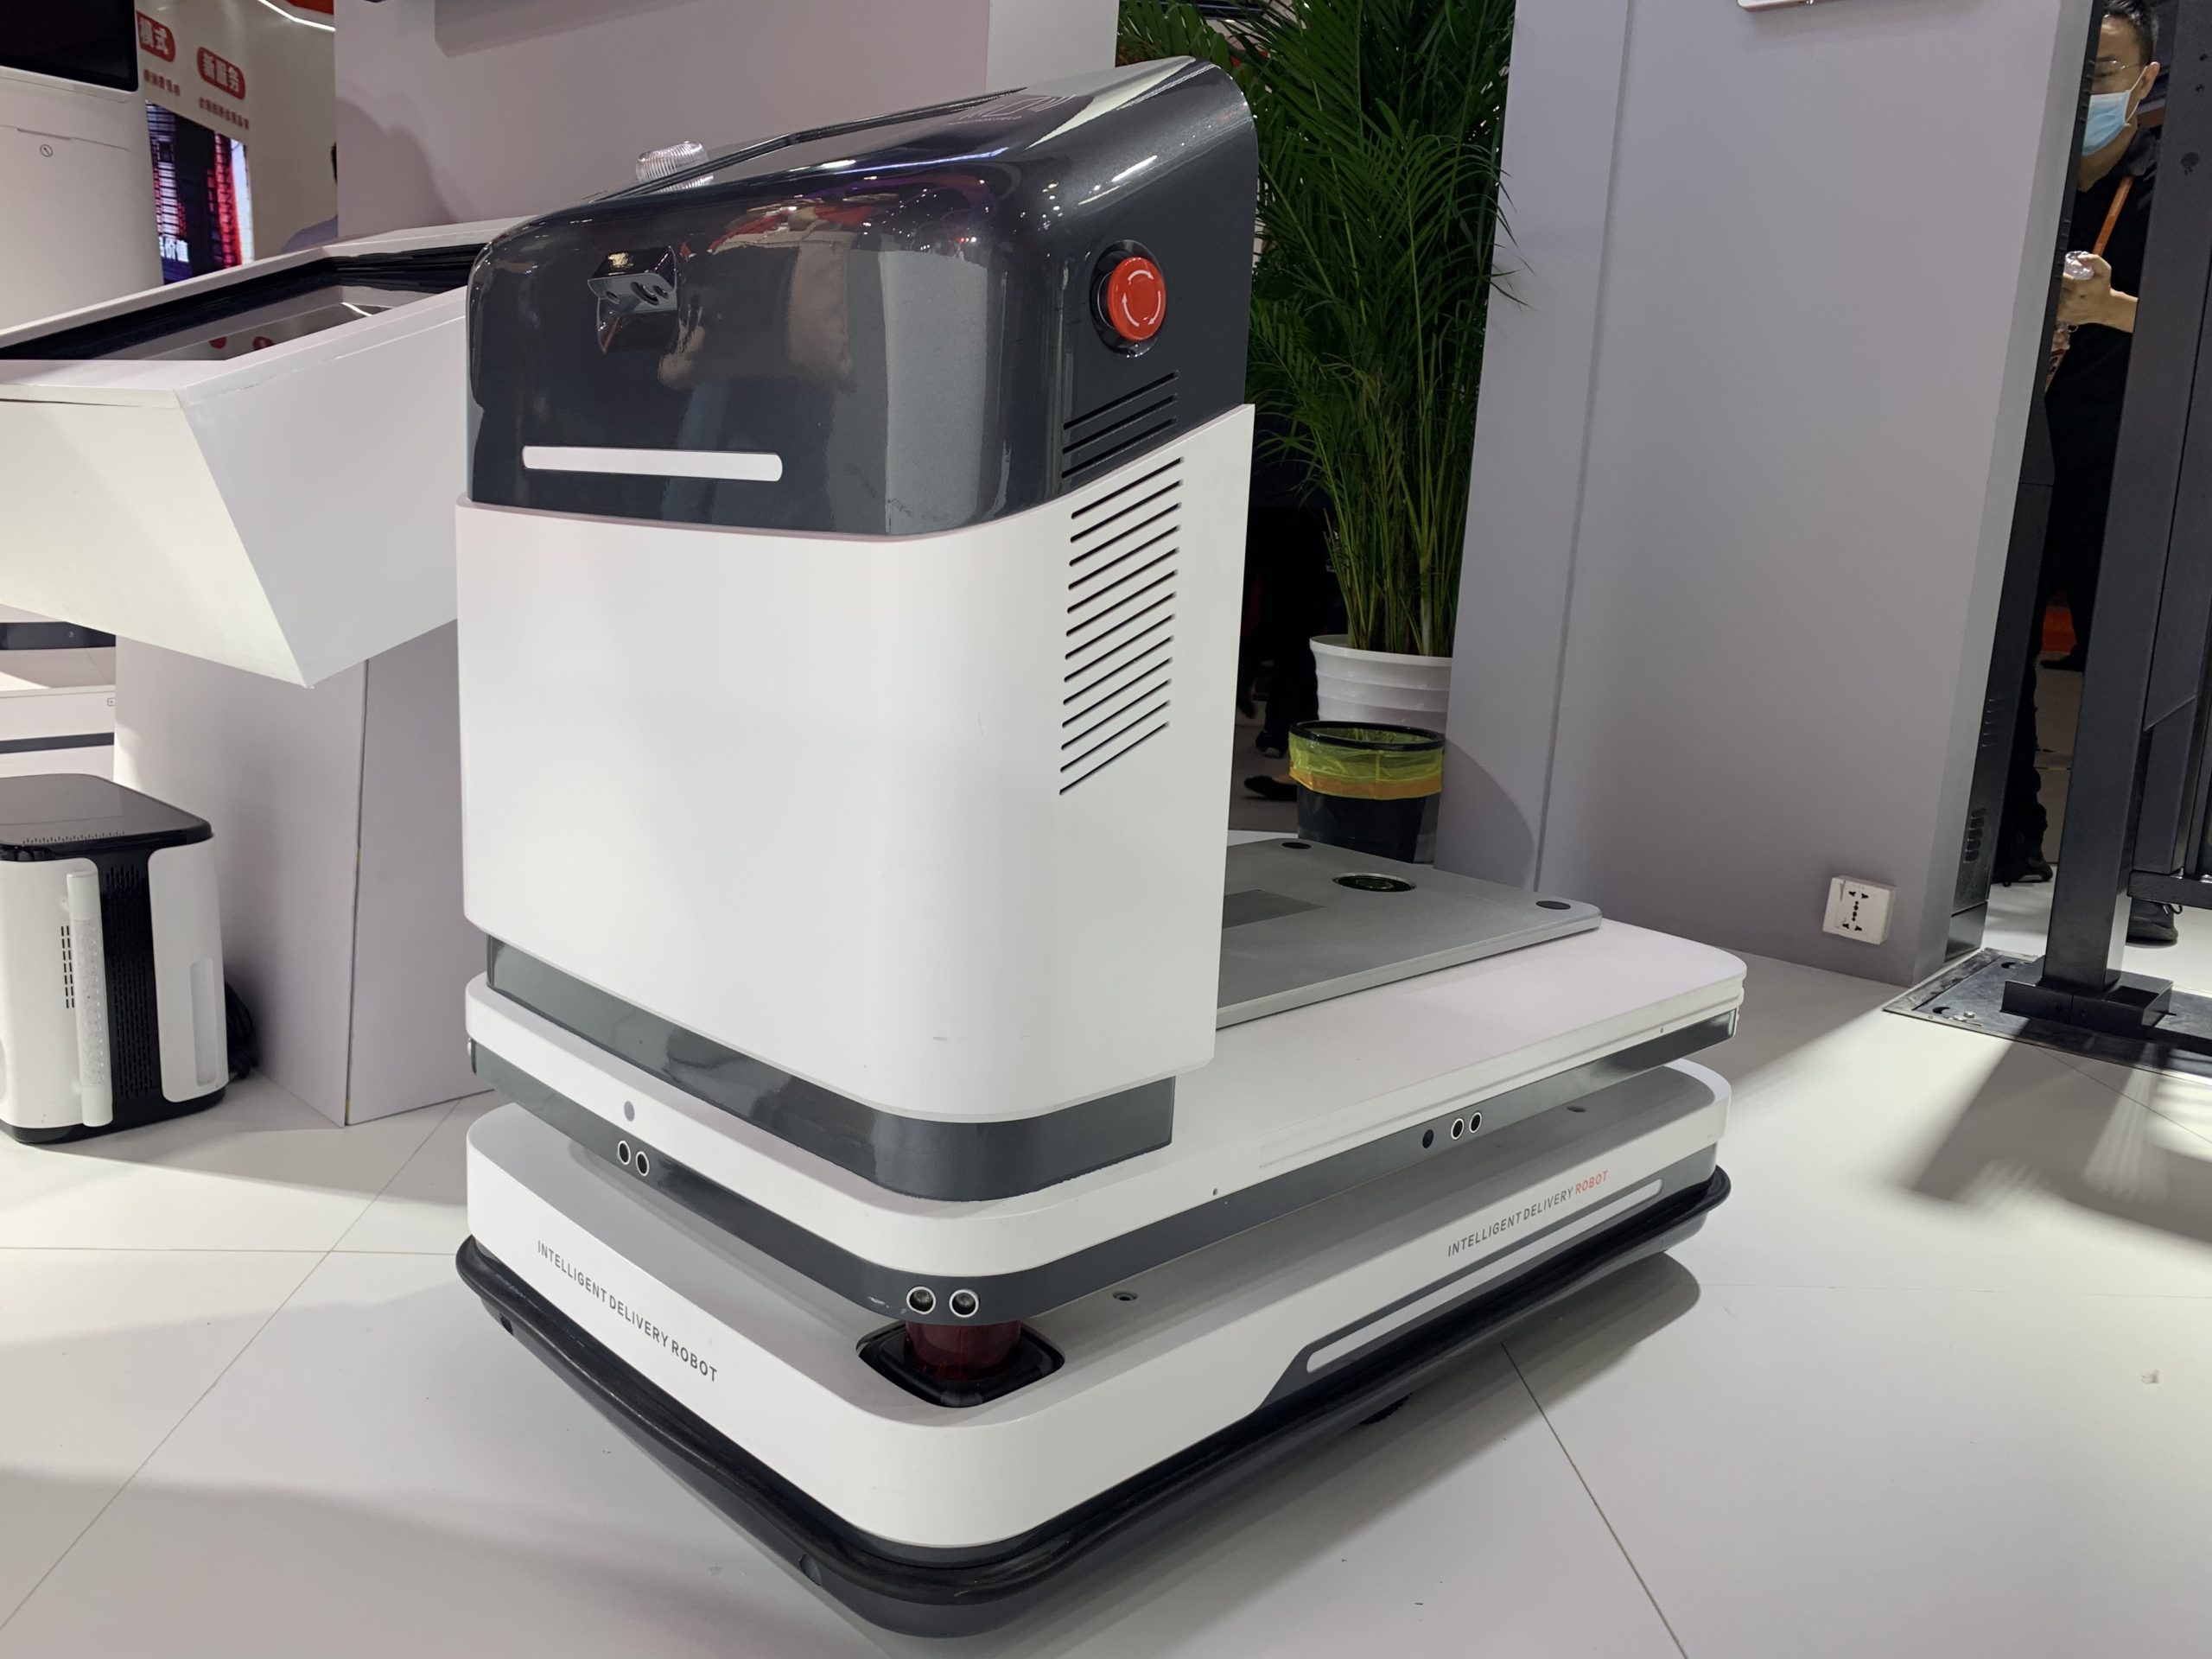 JD Digits provided its indoor delivery robot to a Shanghai hospital treating coronavirus patients